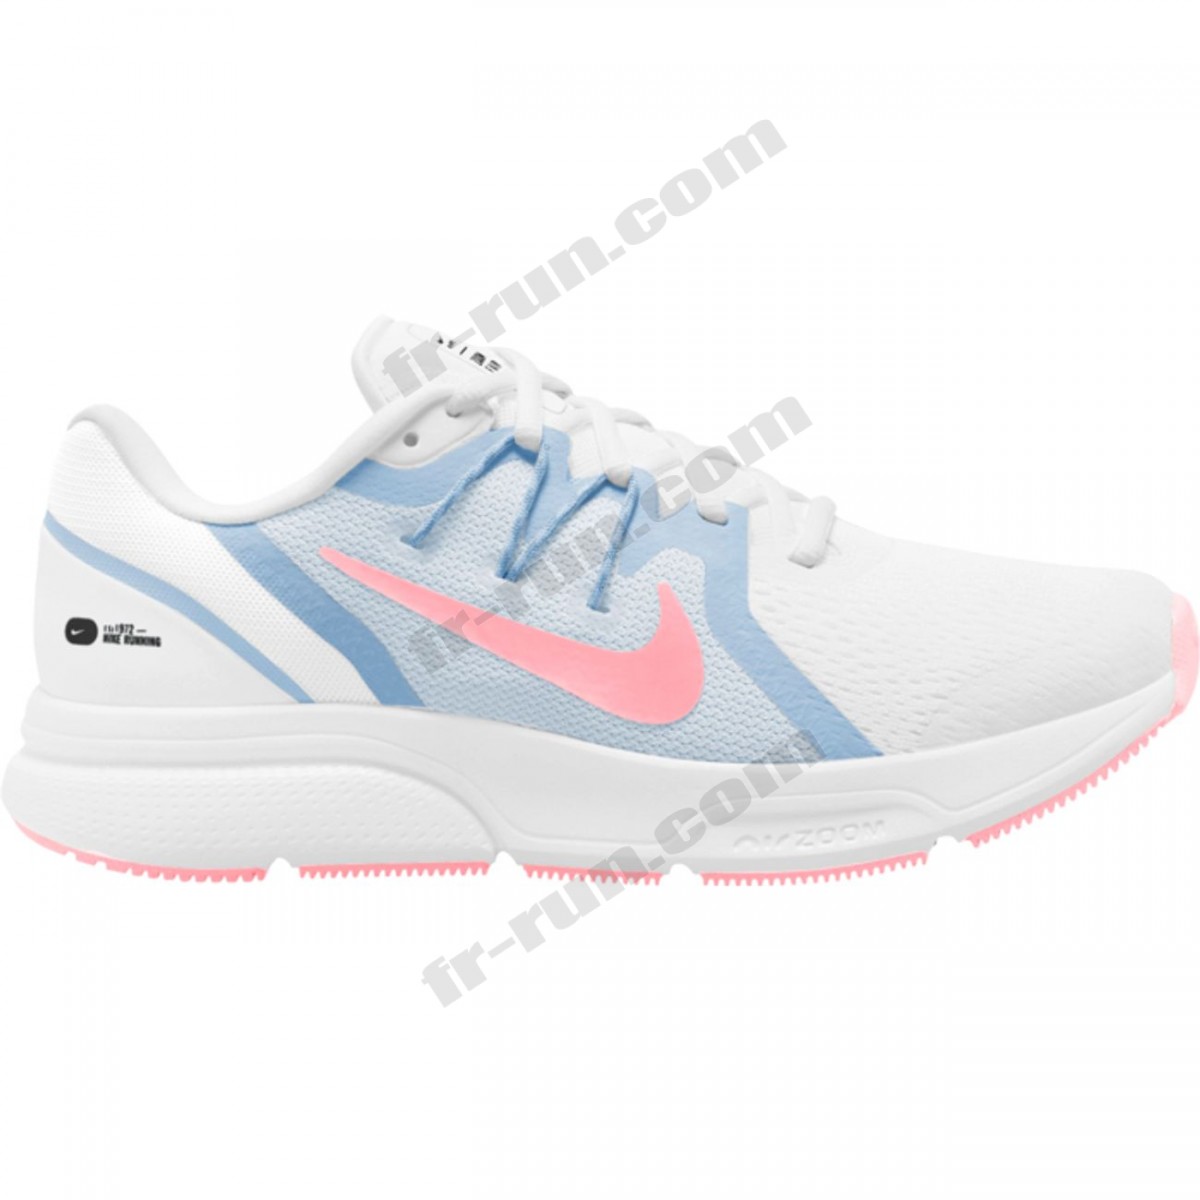 Nike/CHAUSSURES BASSES running femme NIKE WMNS NIKE ZOOM SPAN 3 ◇◇◇ Pas Cher Du Tout - -0